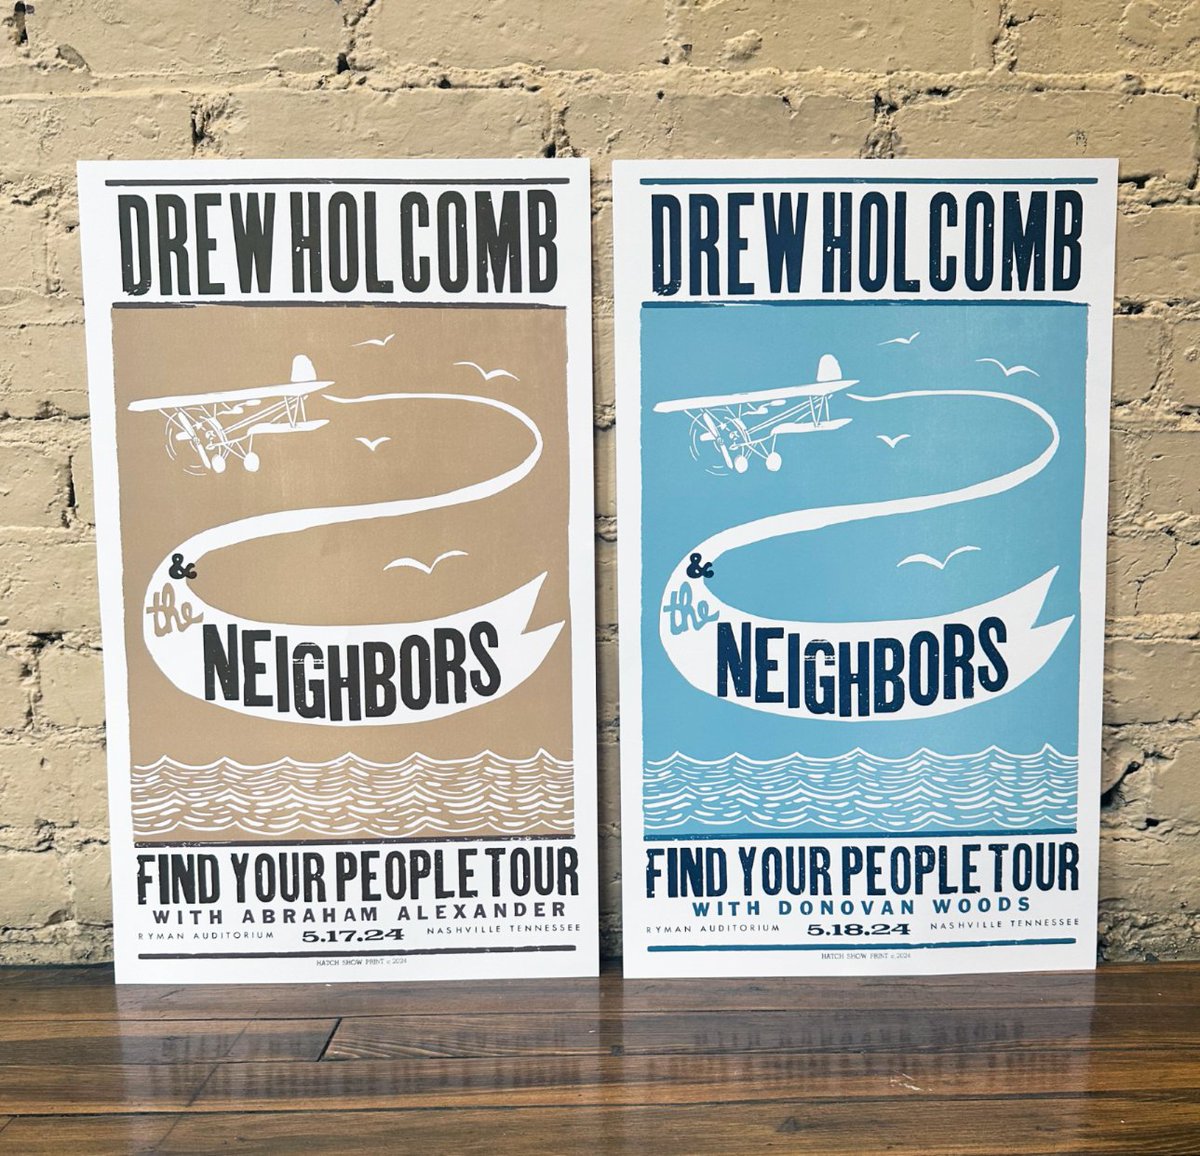 TONIGHT: Tonight, we kick off 2️⃣ nights with our friends @drewholcomb and The Neighbors!